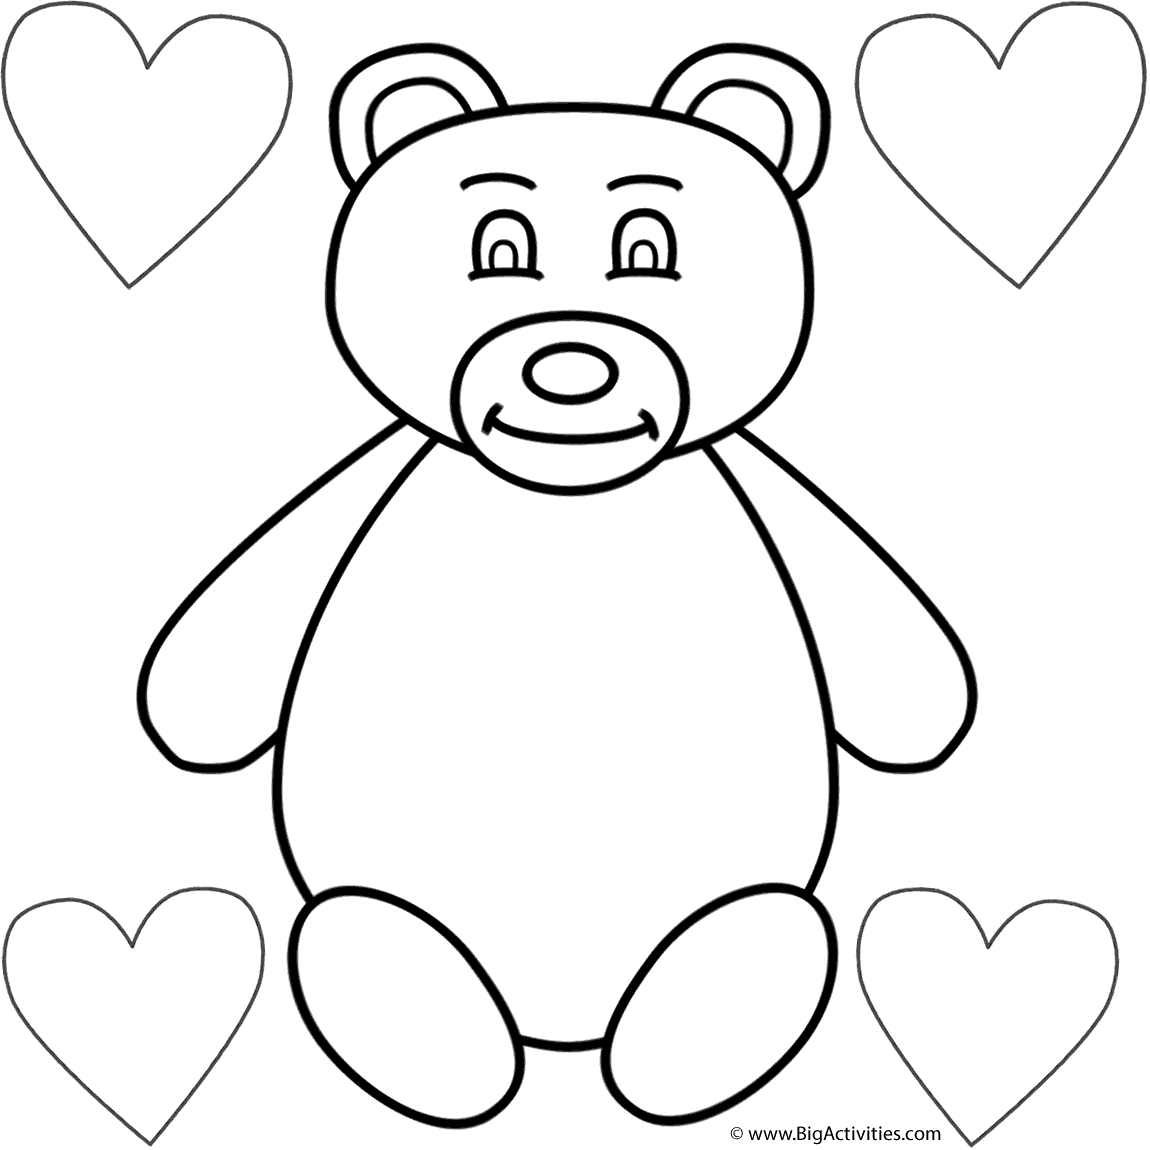 Teddy Bear with Four Hearts  Coloring  Page  Mother s  Day  